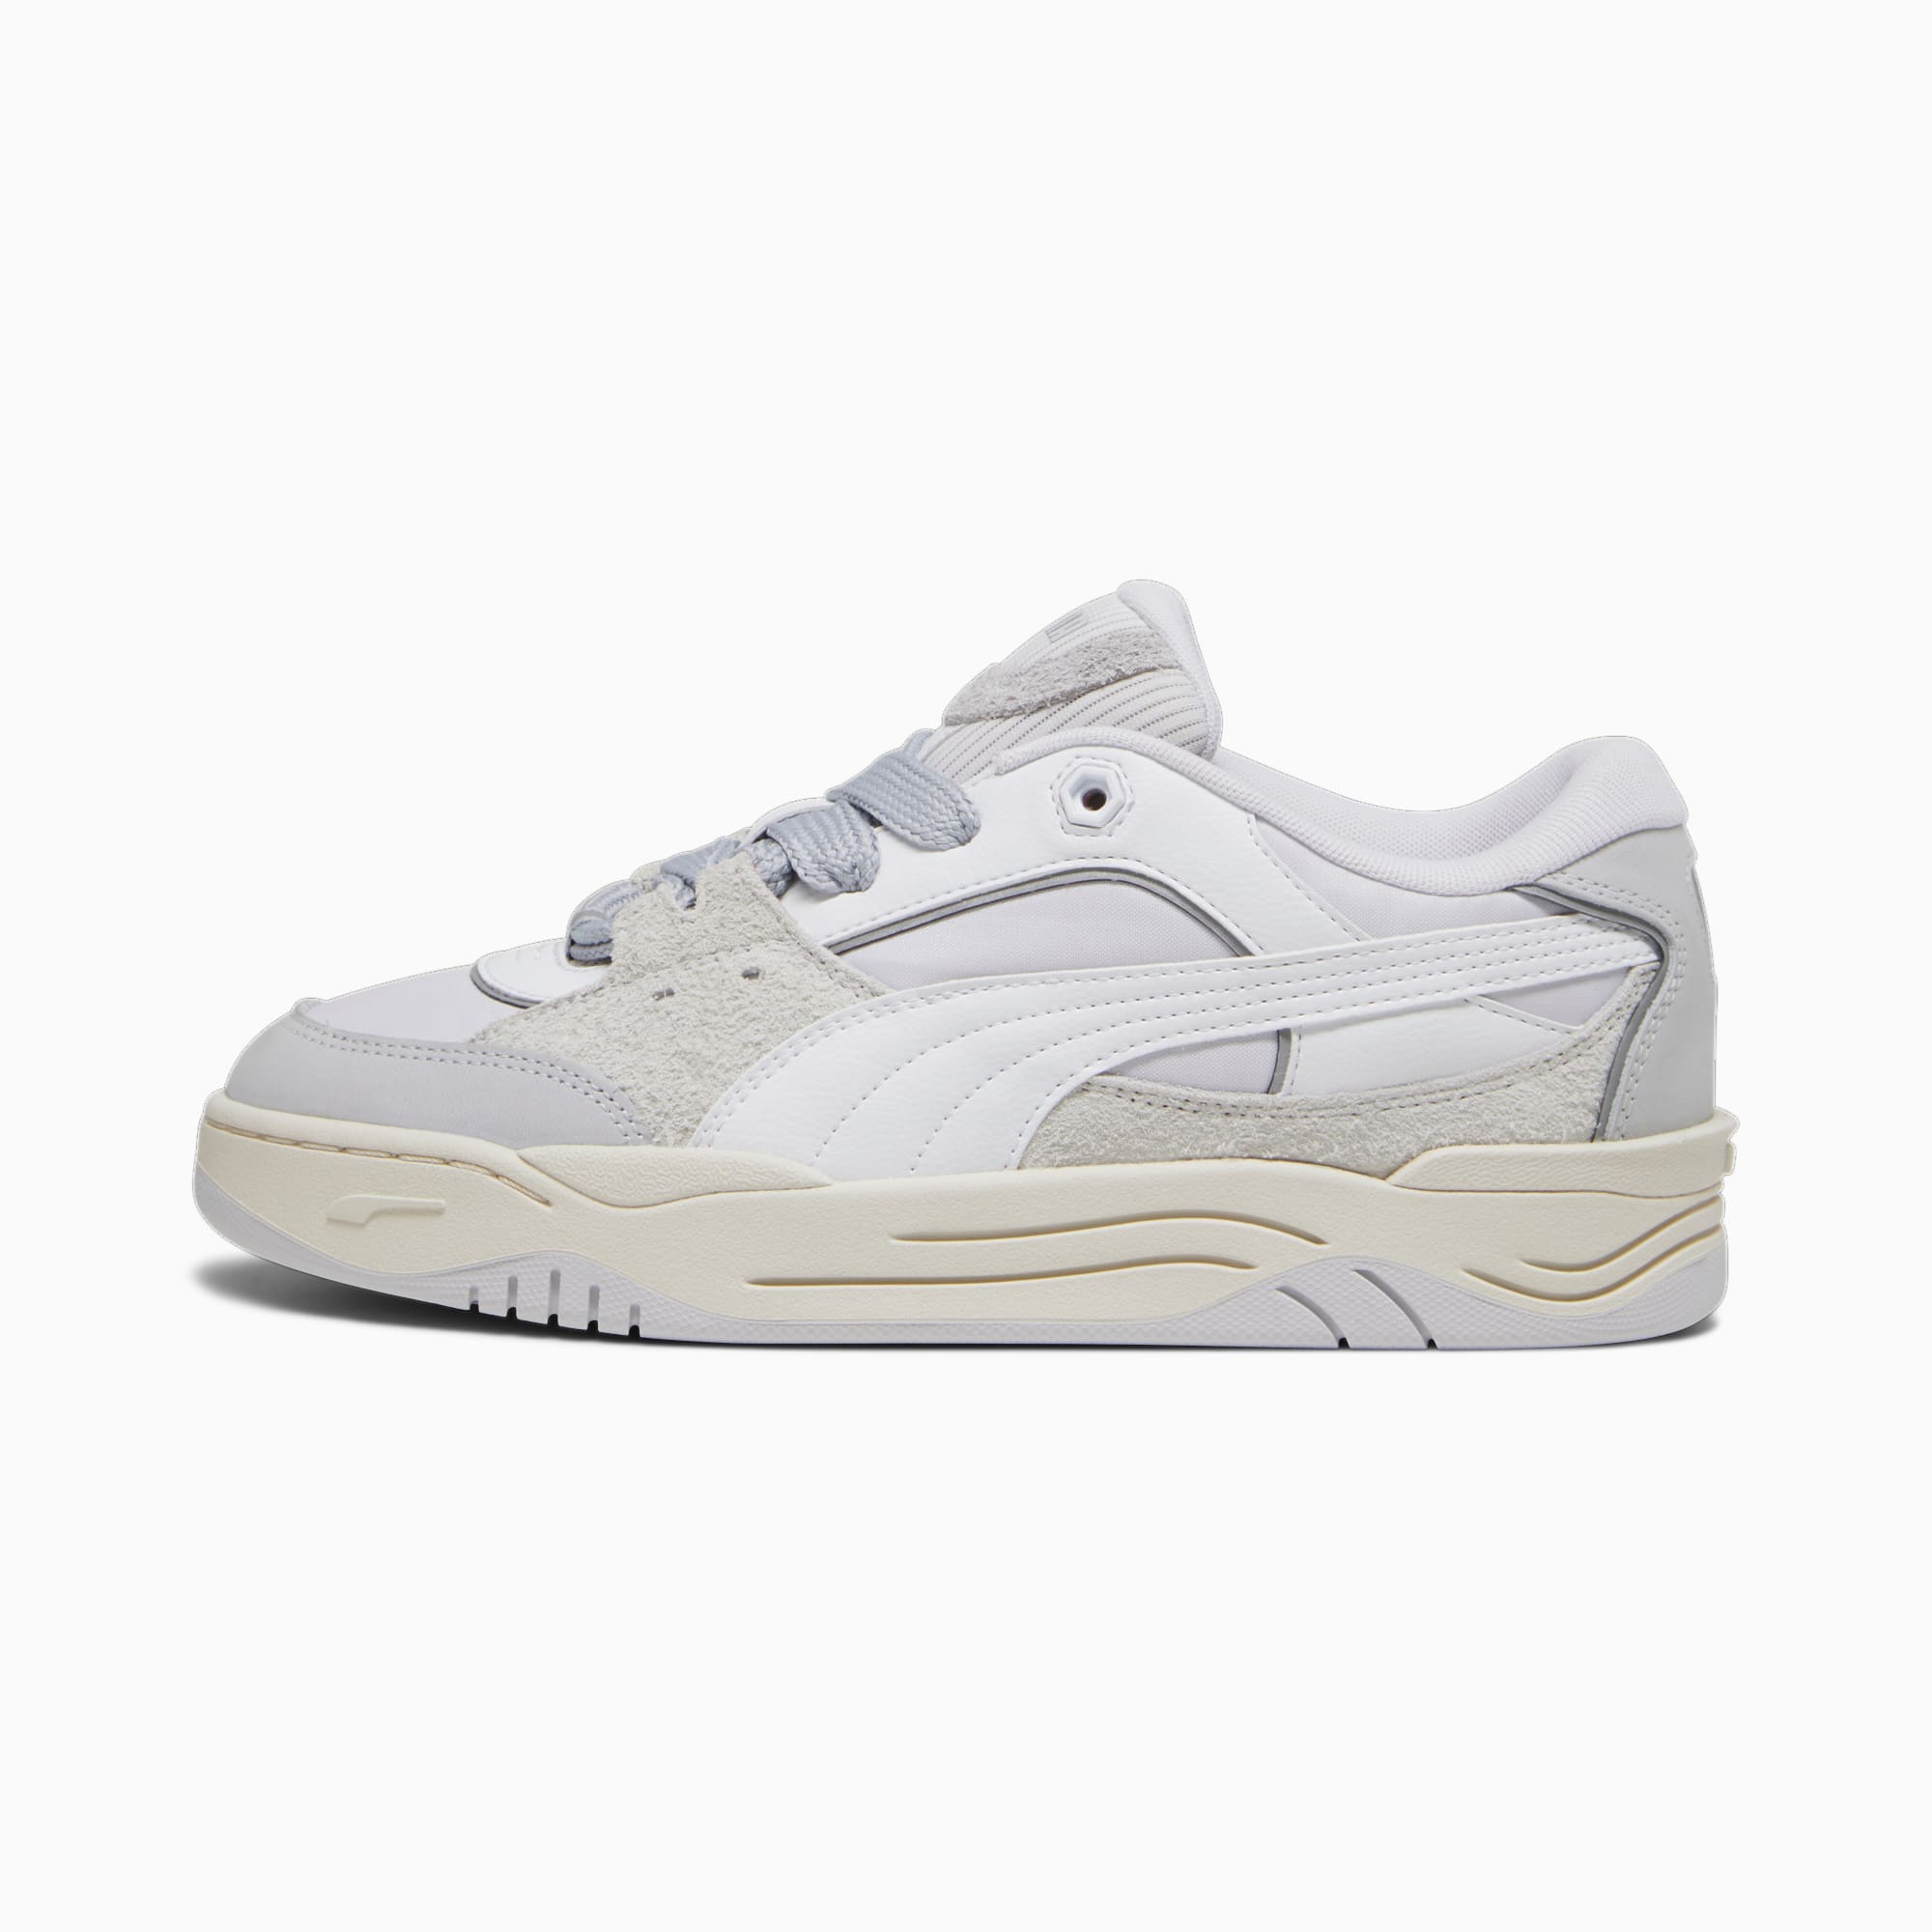 Chaussure Sneakers PUMA-180 Reflect Pour Homme, Blanc/Gris